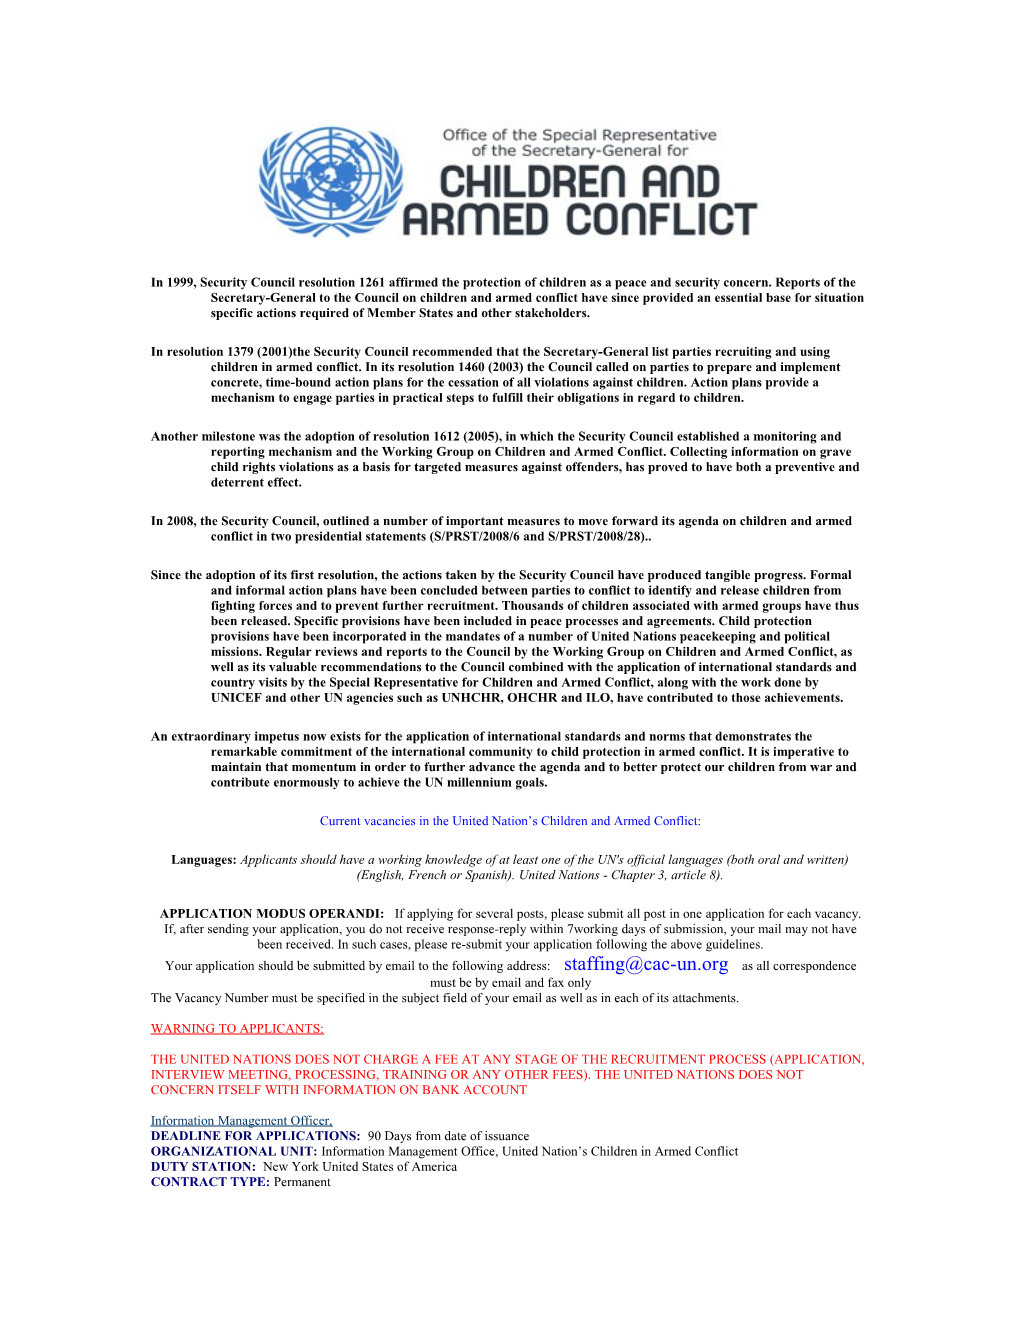 In 1999, Security Council Resolution 1261 Affirmed the Protection of Children As a Peace